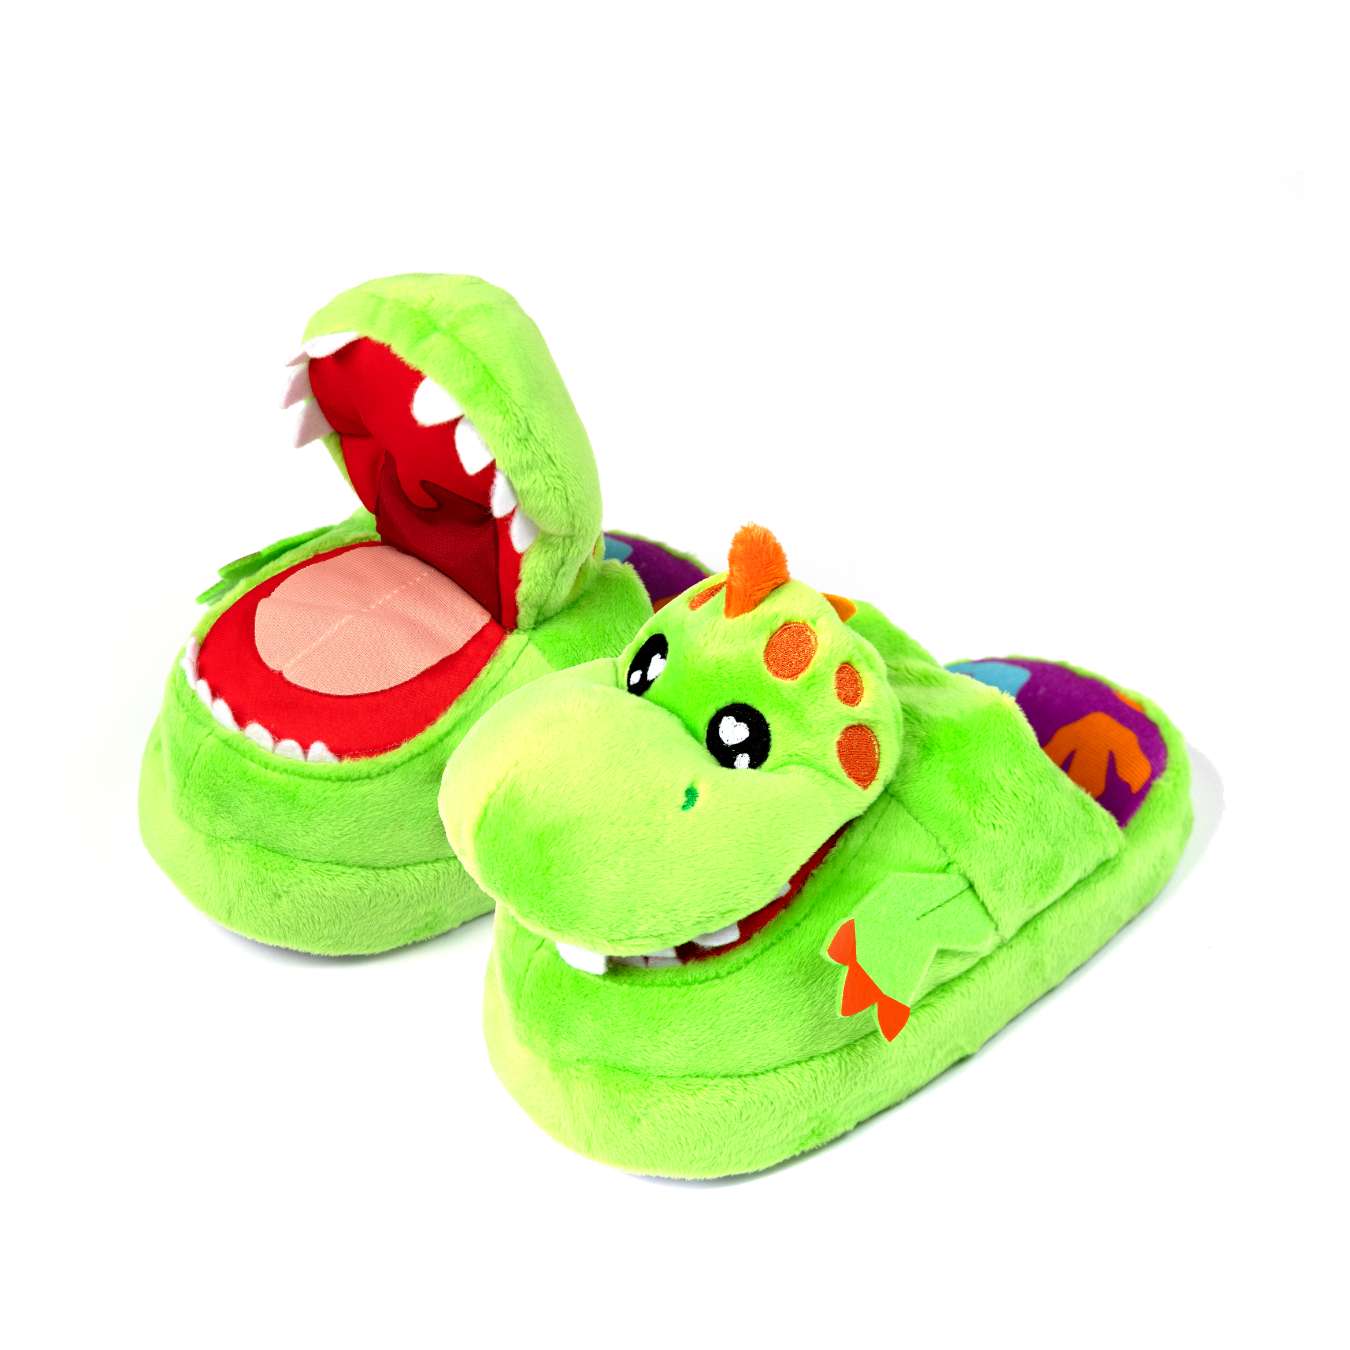 View Stompeez Dinosaur Medium Fun Animated Kids Slippers Soft And Comfy To Wear Anti Slip Soles High Street TV information